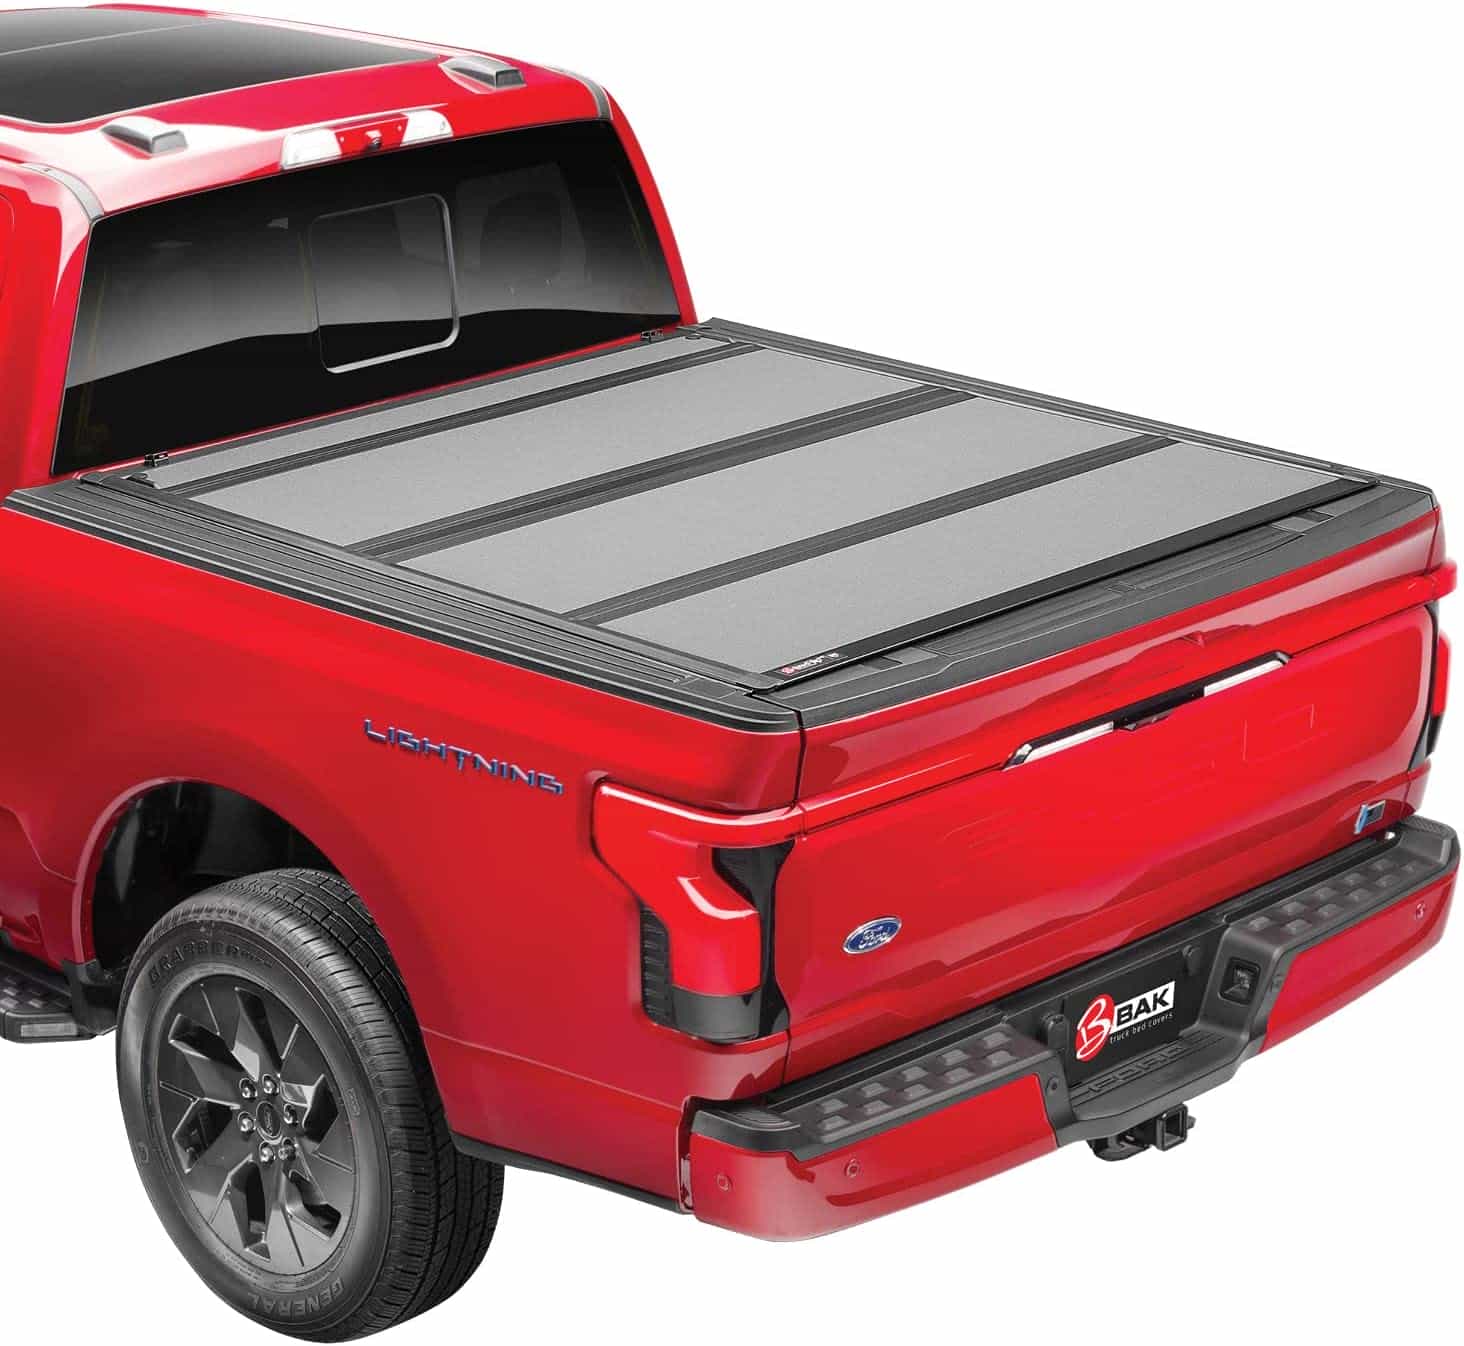 Experience Unmatched Quality With The Best RAM 2500 Tonneau Cover